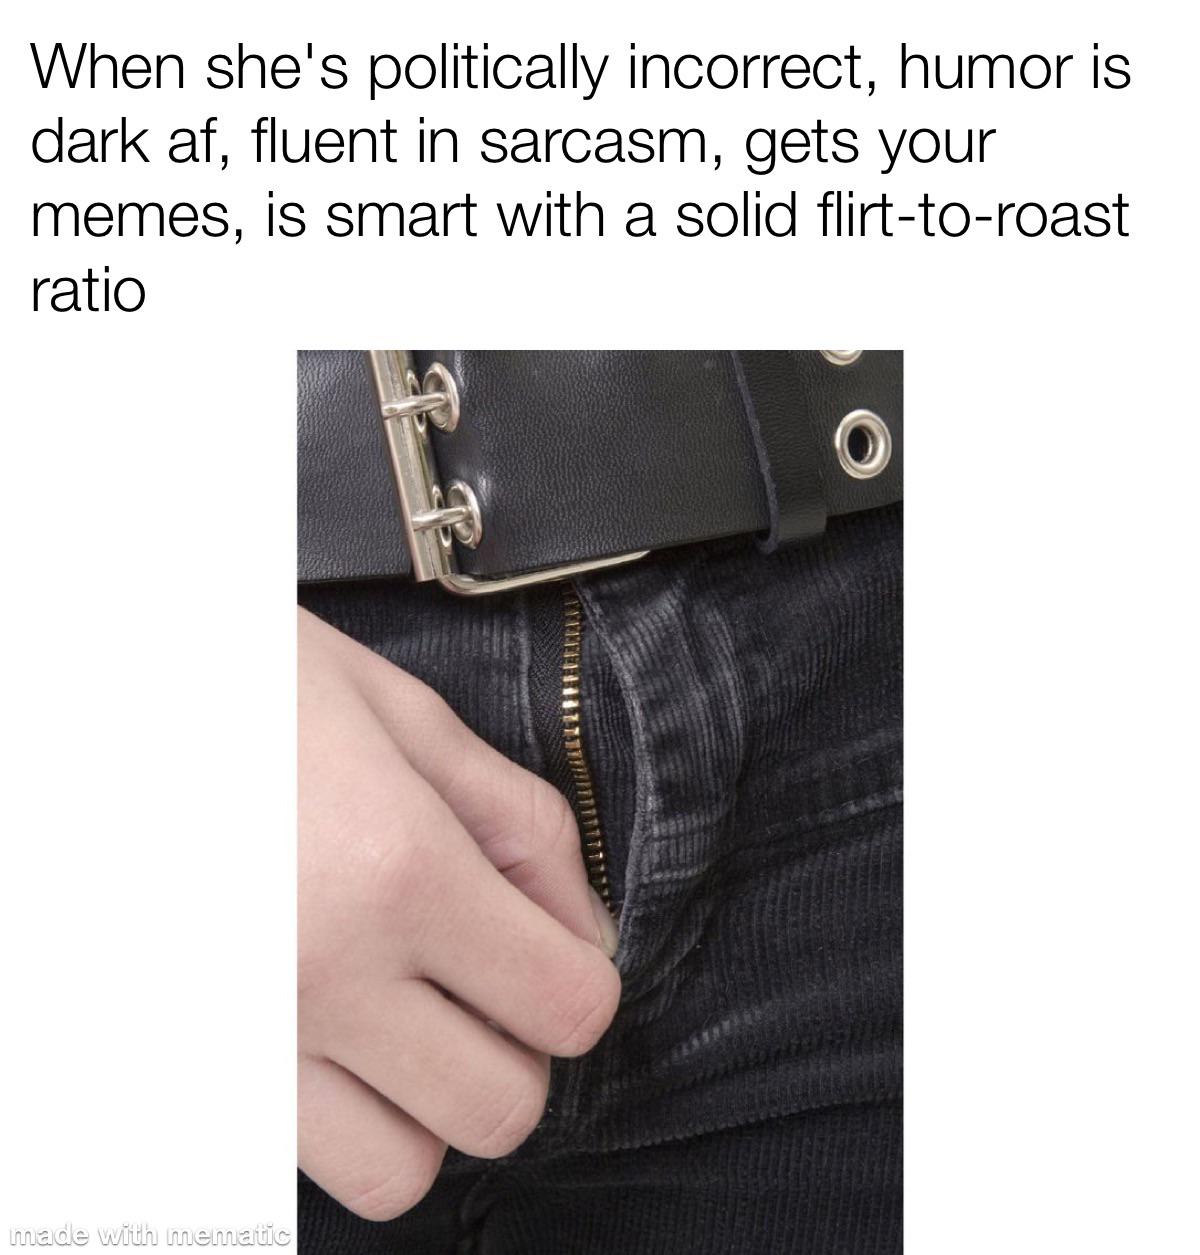 dank memes - zipper down pants - When she's politically incorrect, humor is dark af, fluent in sarcasm, gets your memes, is smart with a solid flirttoroast ratio made with mematic